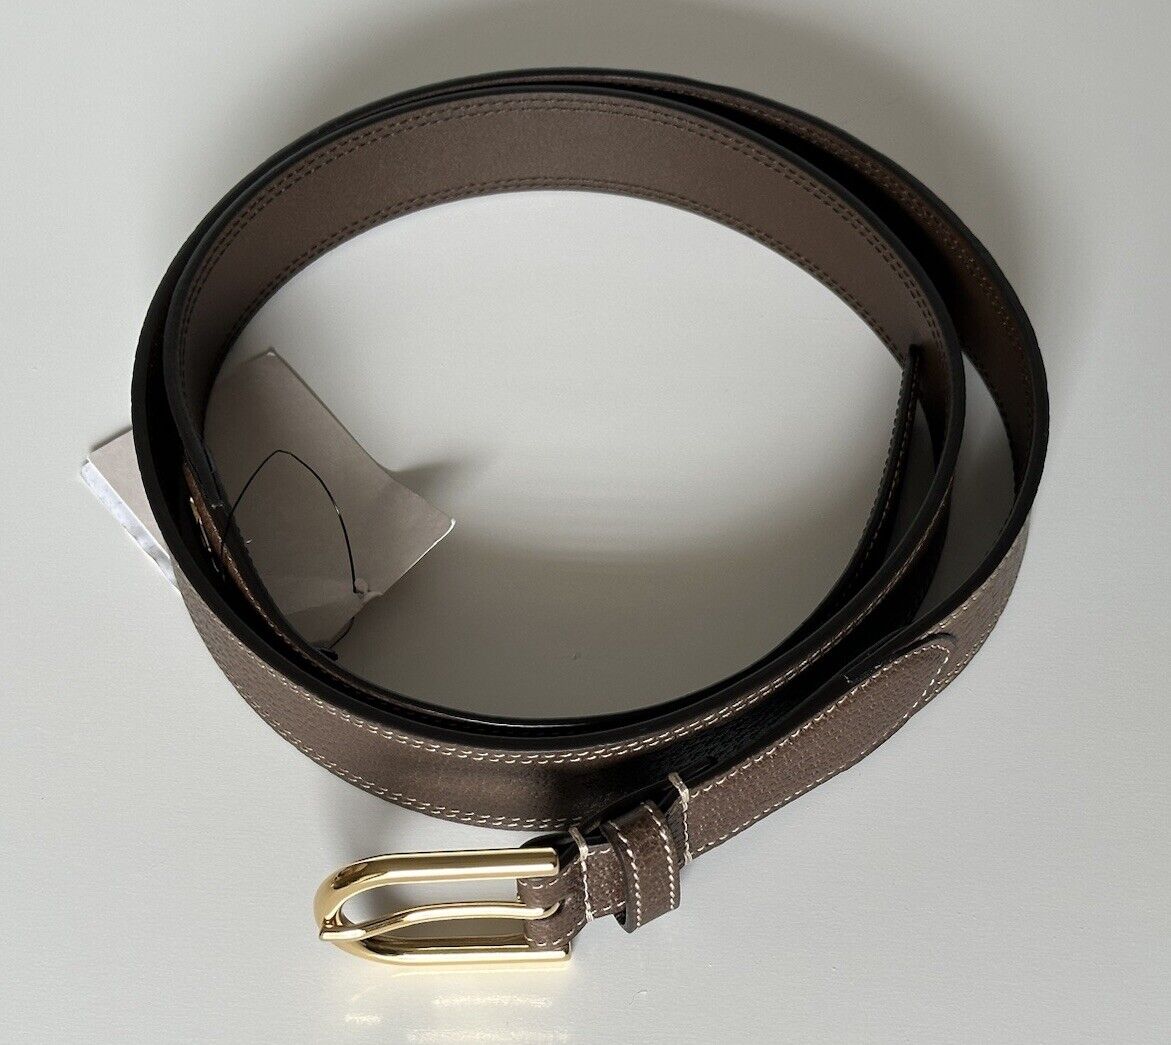 Gucci Dollar Pigprint Men’s Leather Belt Brown 105/42 715601 Italy NWT